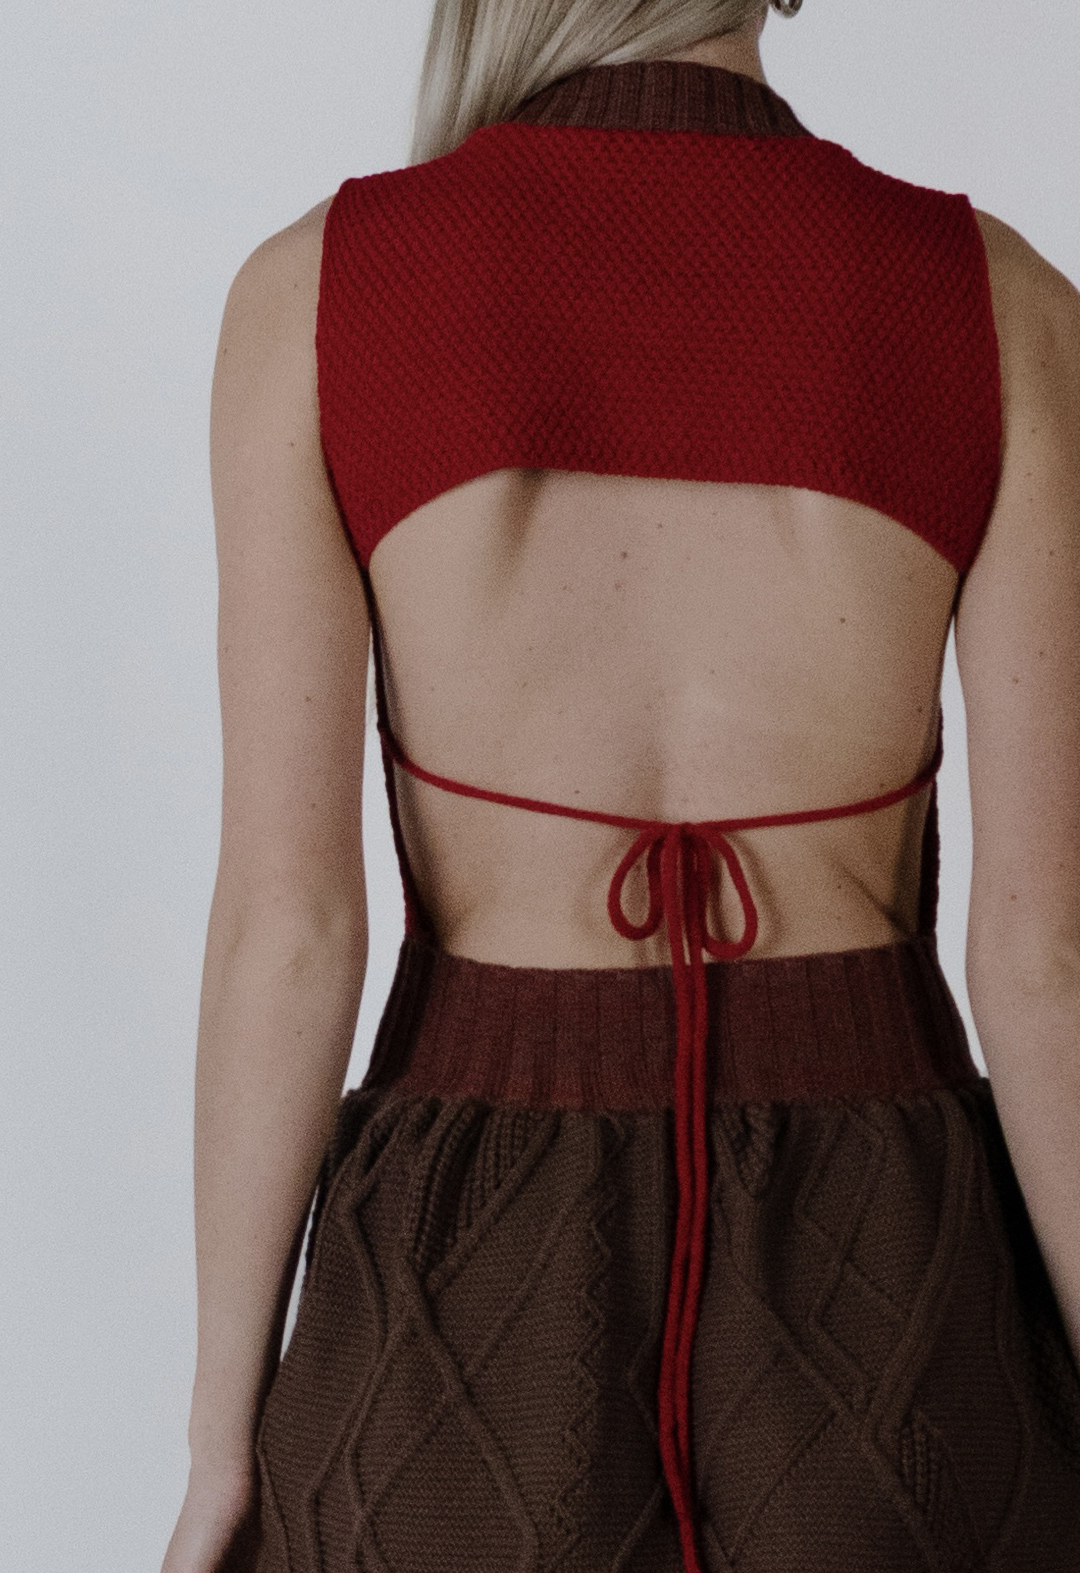 In this photo, you see the model's back with her arms to the side. The tight-fitting top of the dress with moss stitching and the lower back are shown, with a bow across the model's back. You can see the top portion of the Aran cable skirt and the heather red rib at the waist. The background is white.